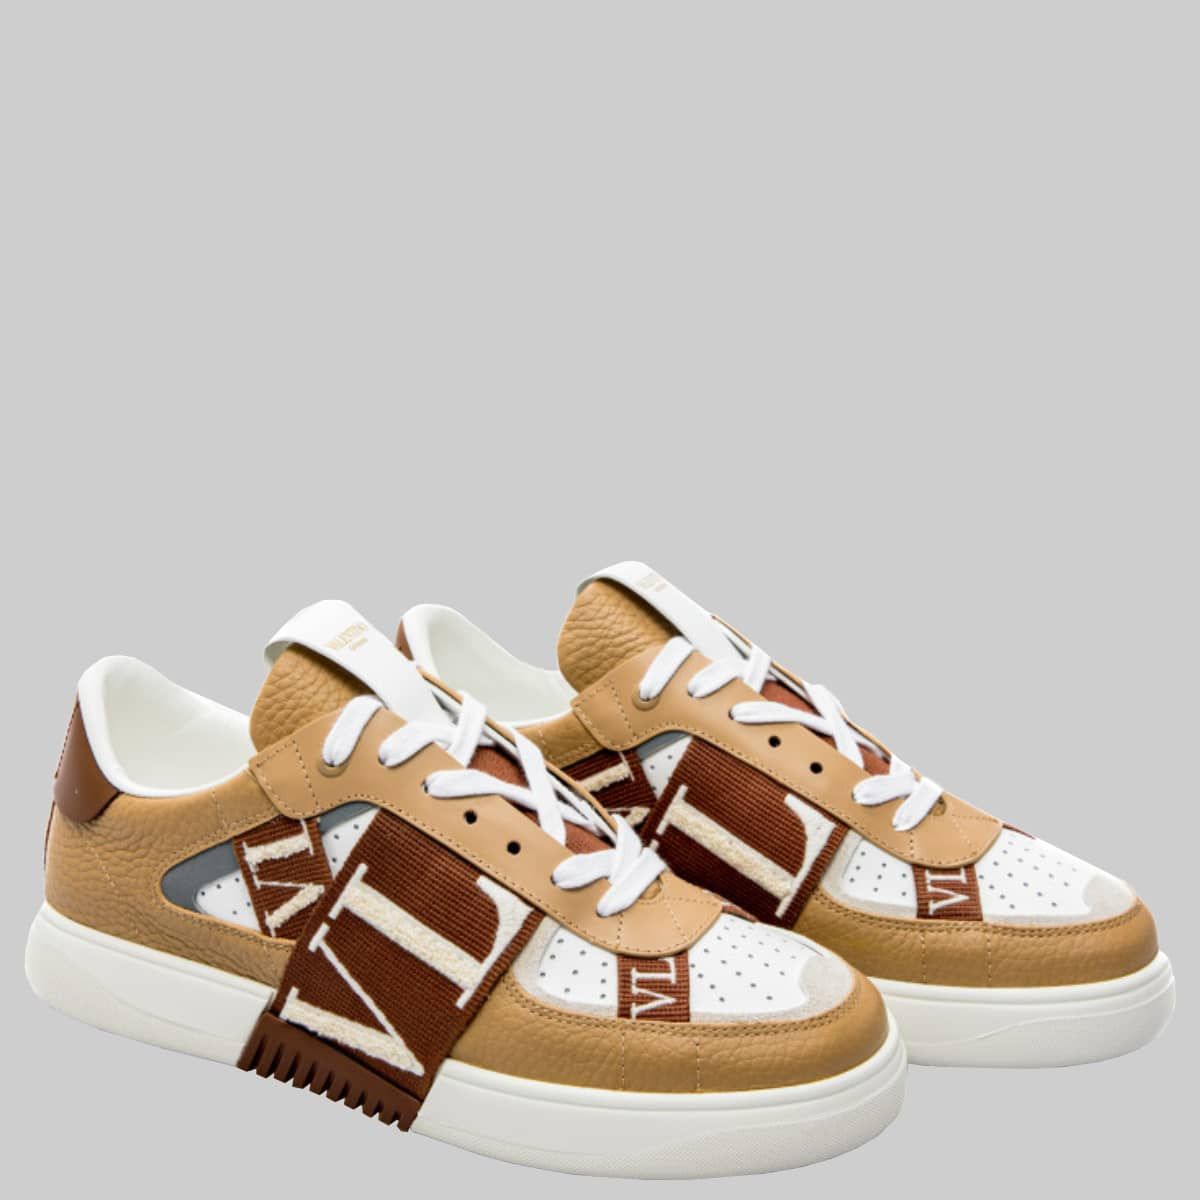 Brown Round Toe Lace-Up Sneakers